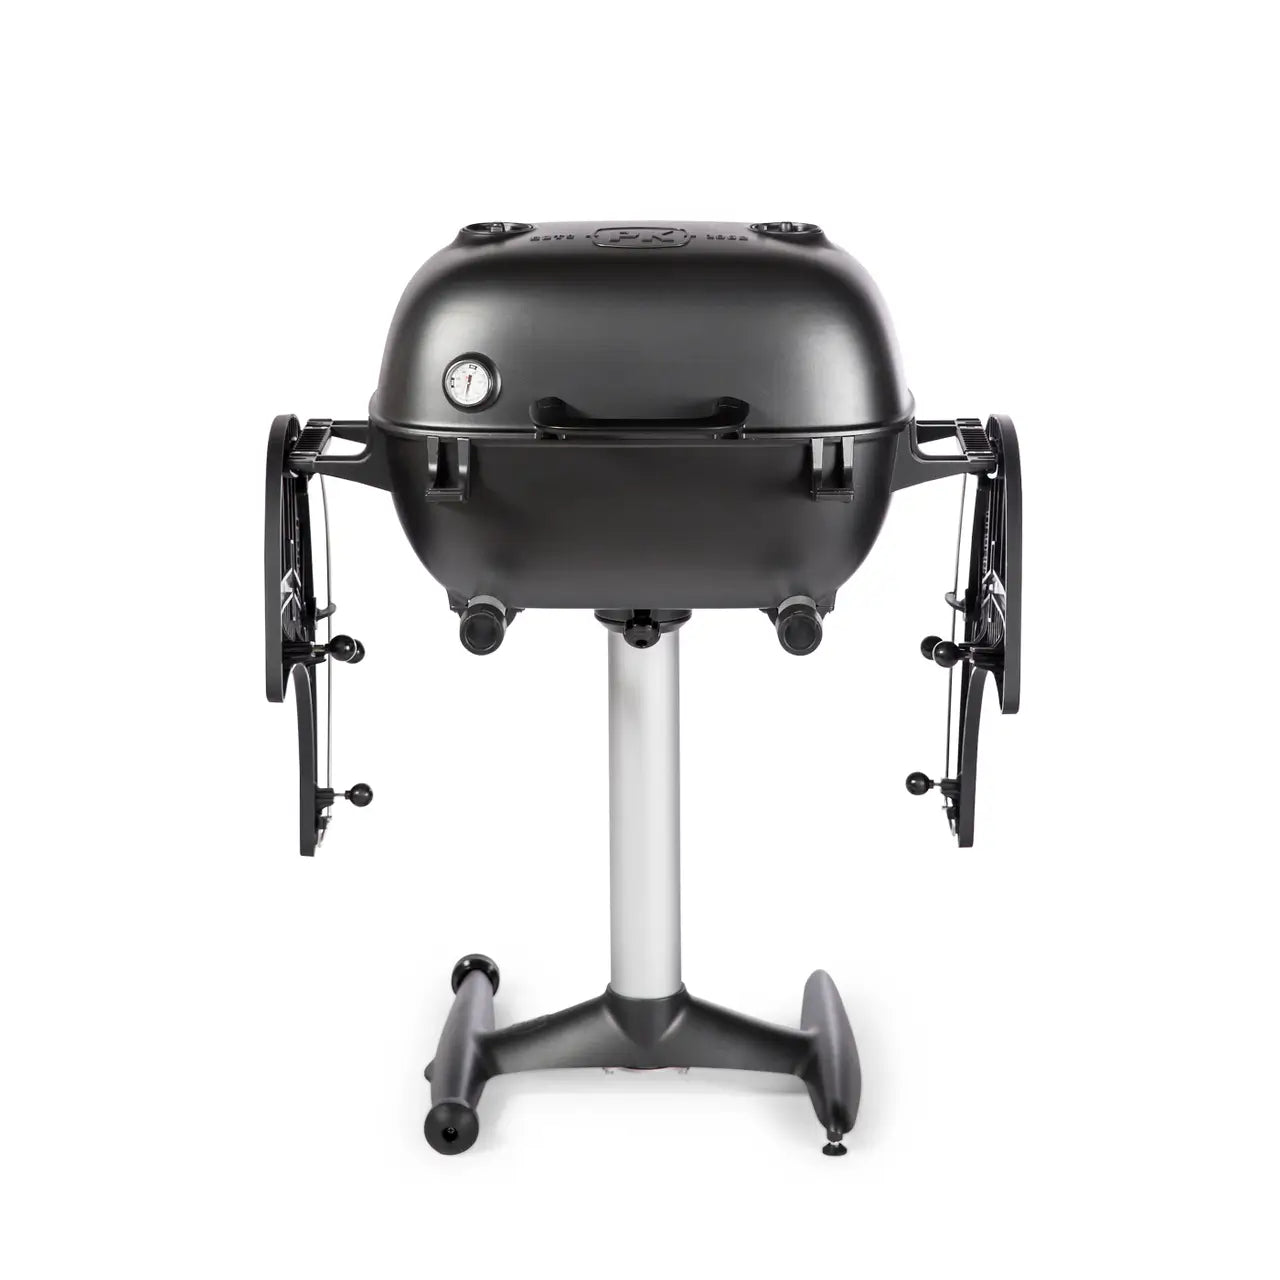 PK Grills PK360 Grill and Smoker - Graphite